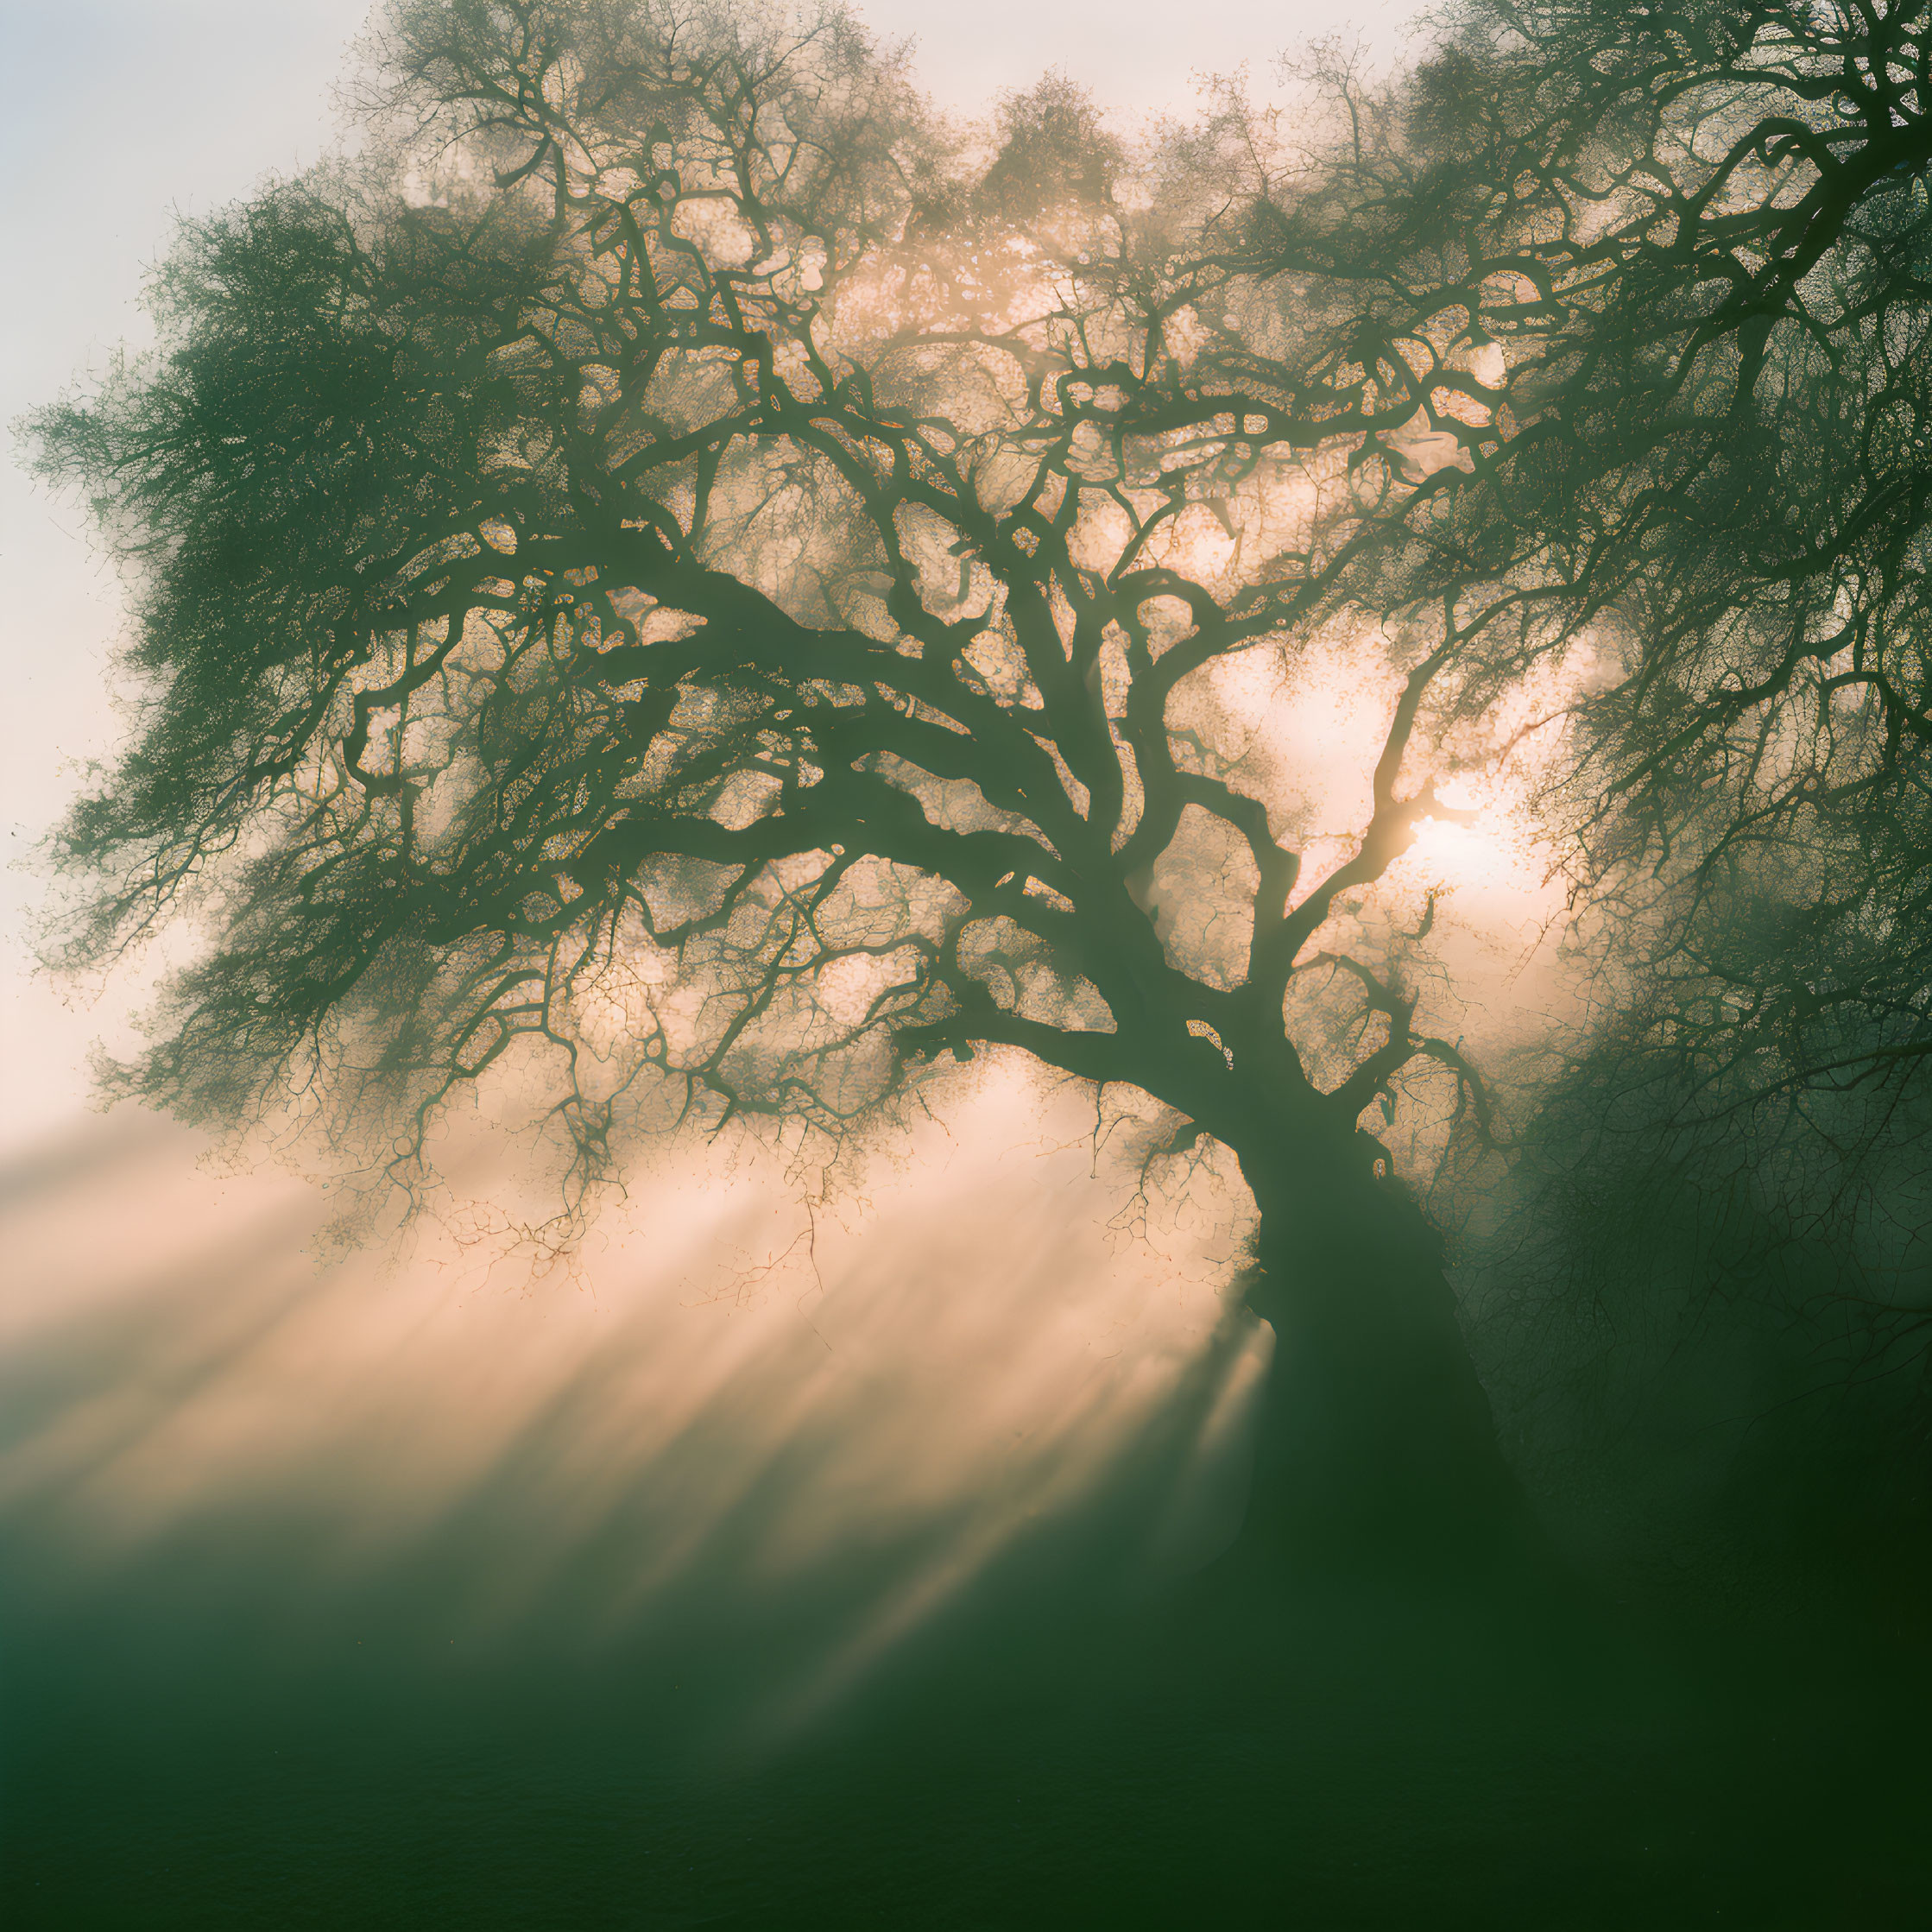 Silhouetted tree against misty backdrop with sunbeams creating serene atmosphere